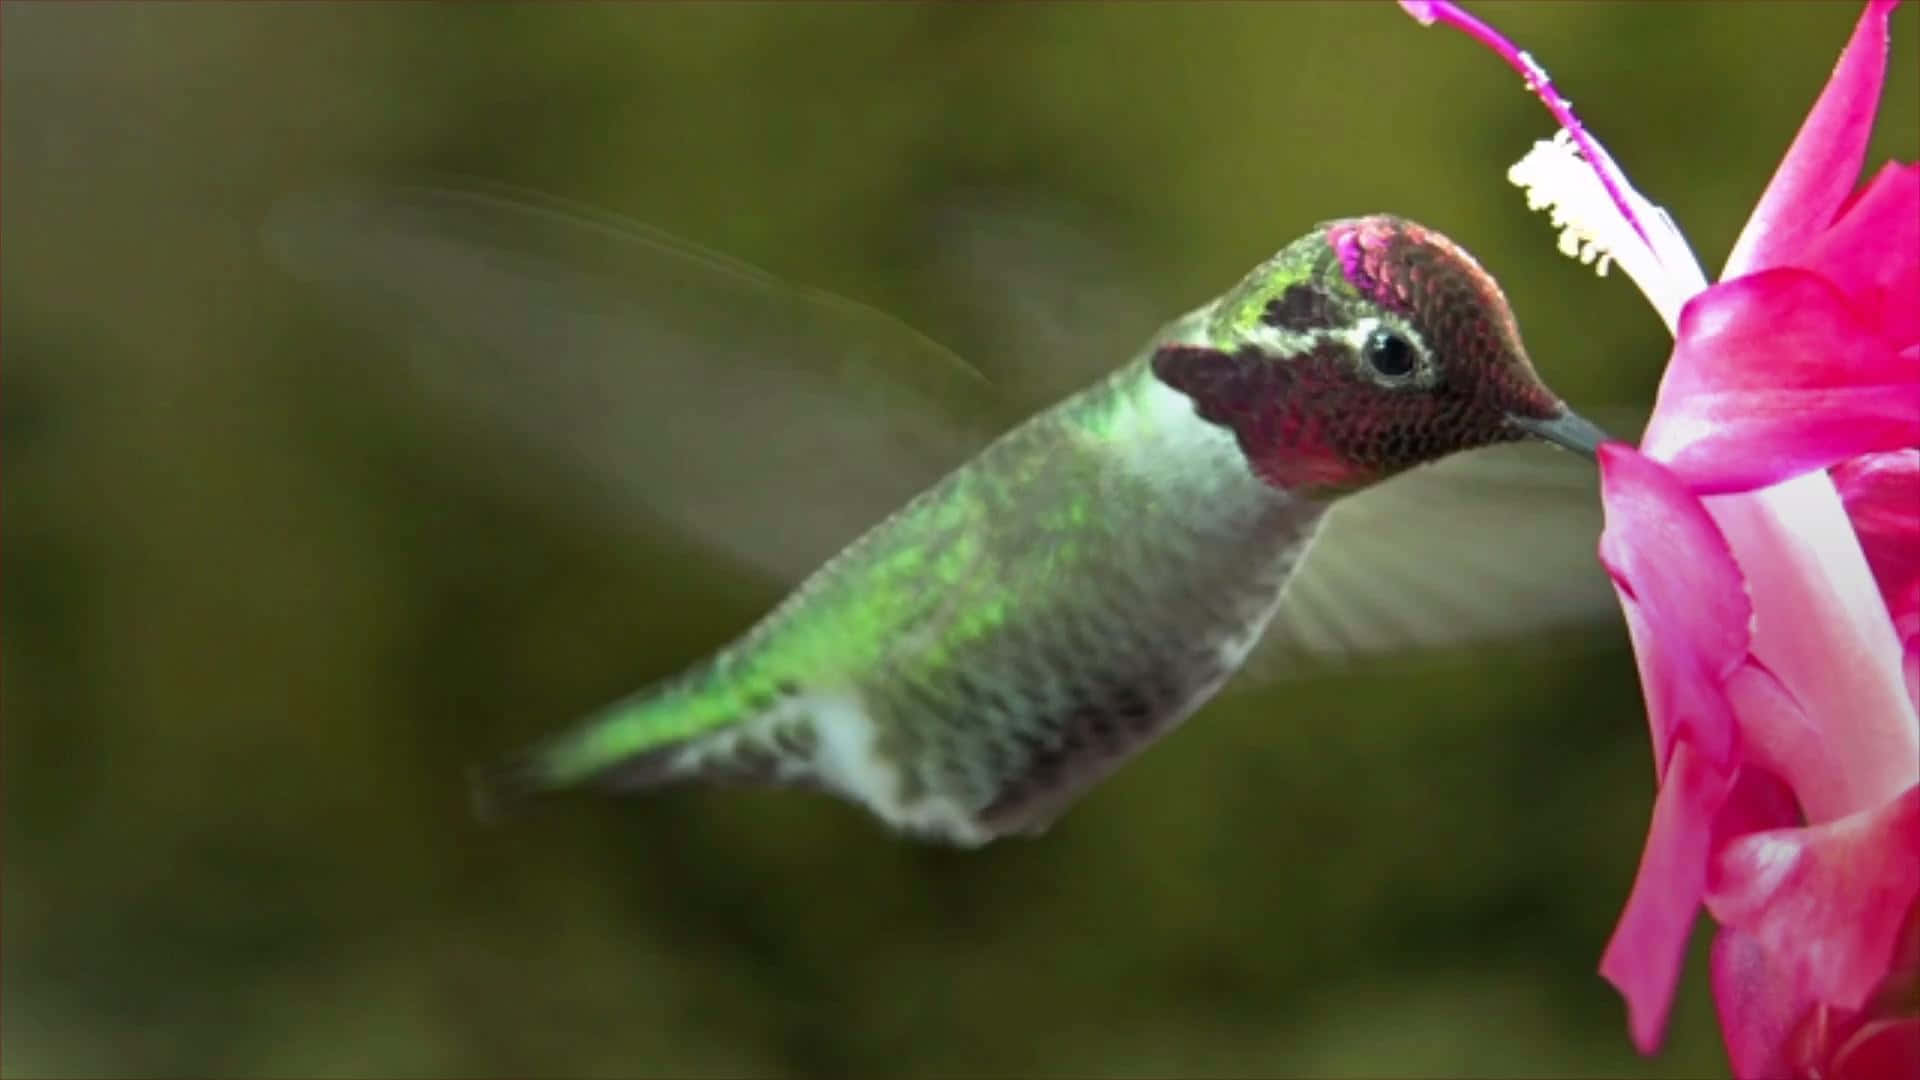 Image  A vibrant and colorful hummingbird drinking from an exotic flower